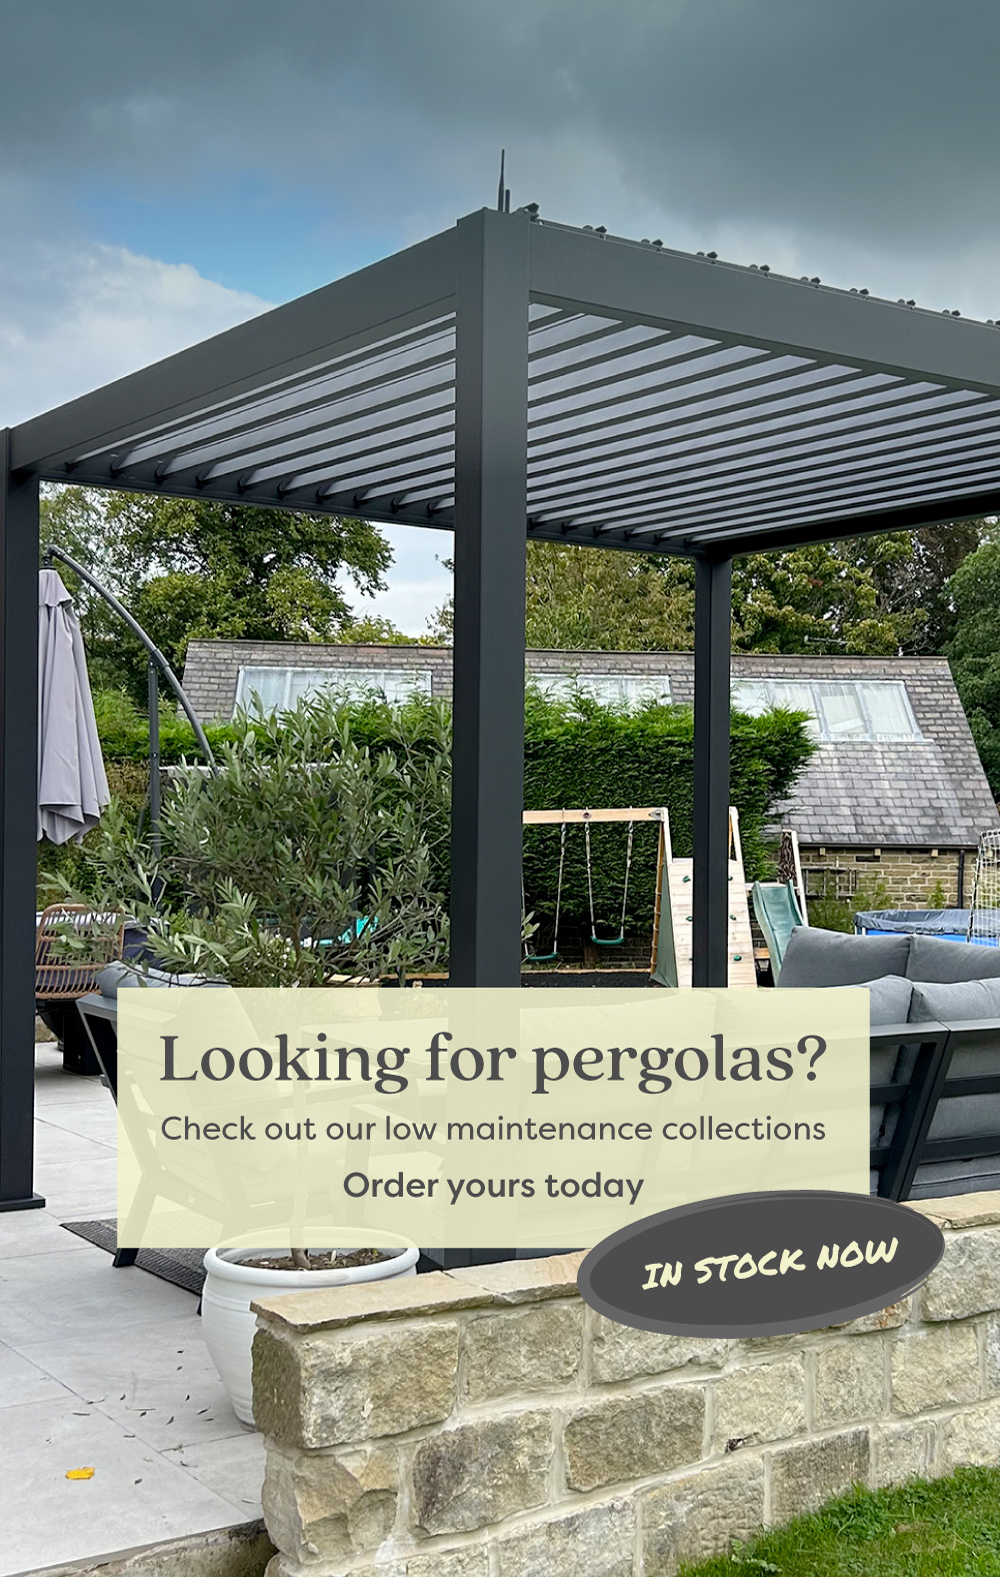 Looking for pergolas - Check out our low maintenance collections